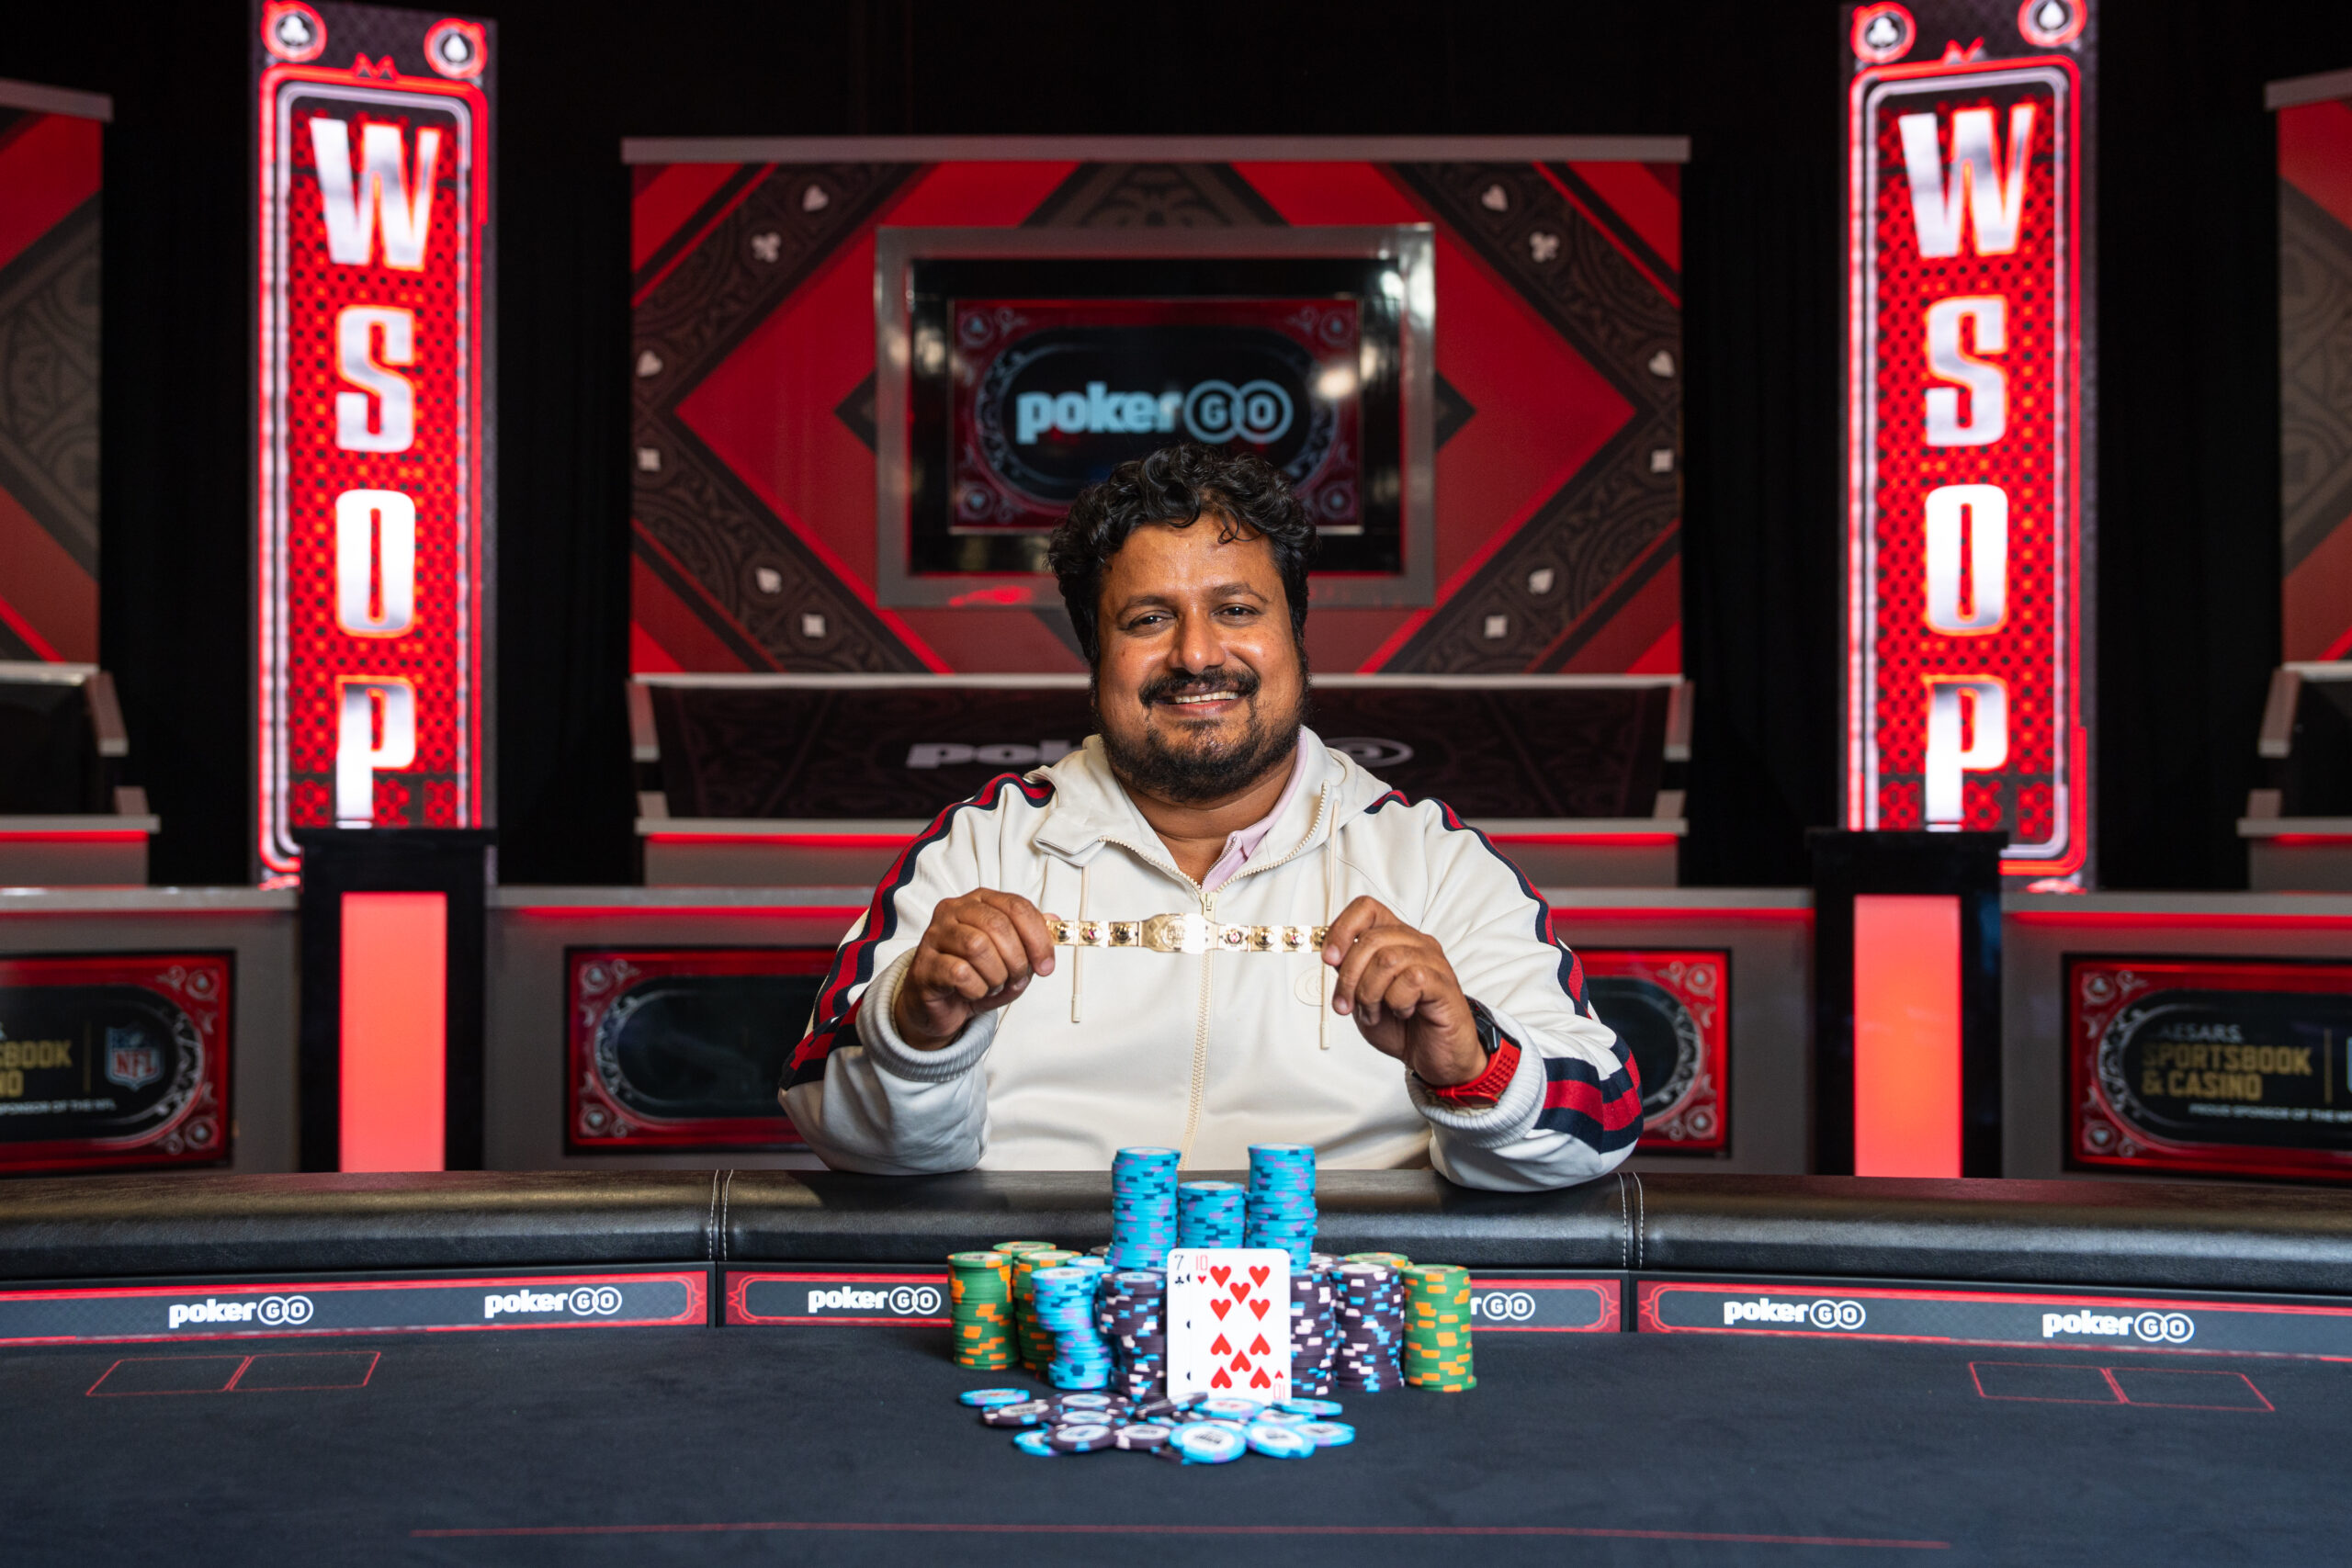 Santhosh Suvarna wins the Biggest Buy-in Event of the WSOP for $5,415,152